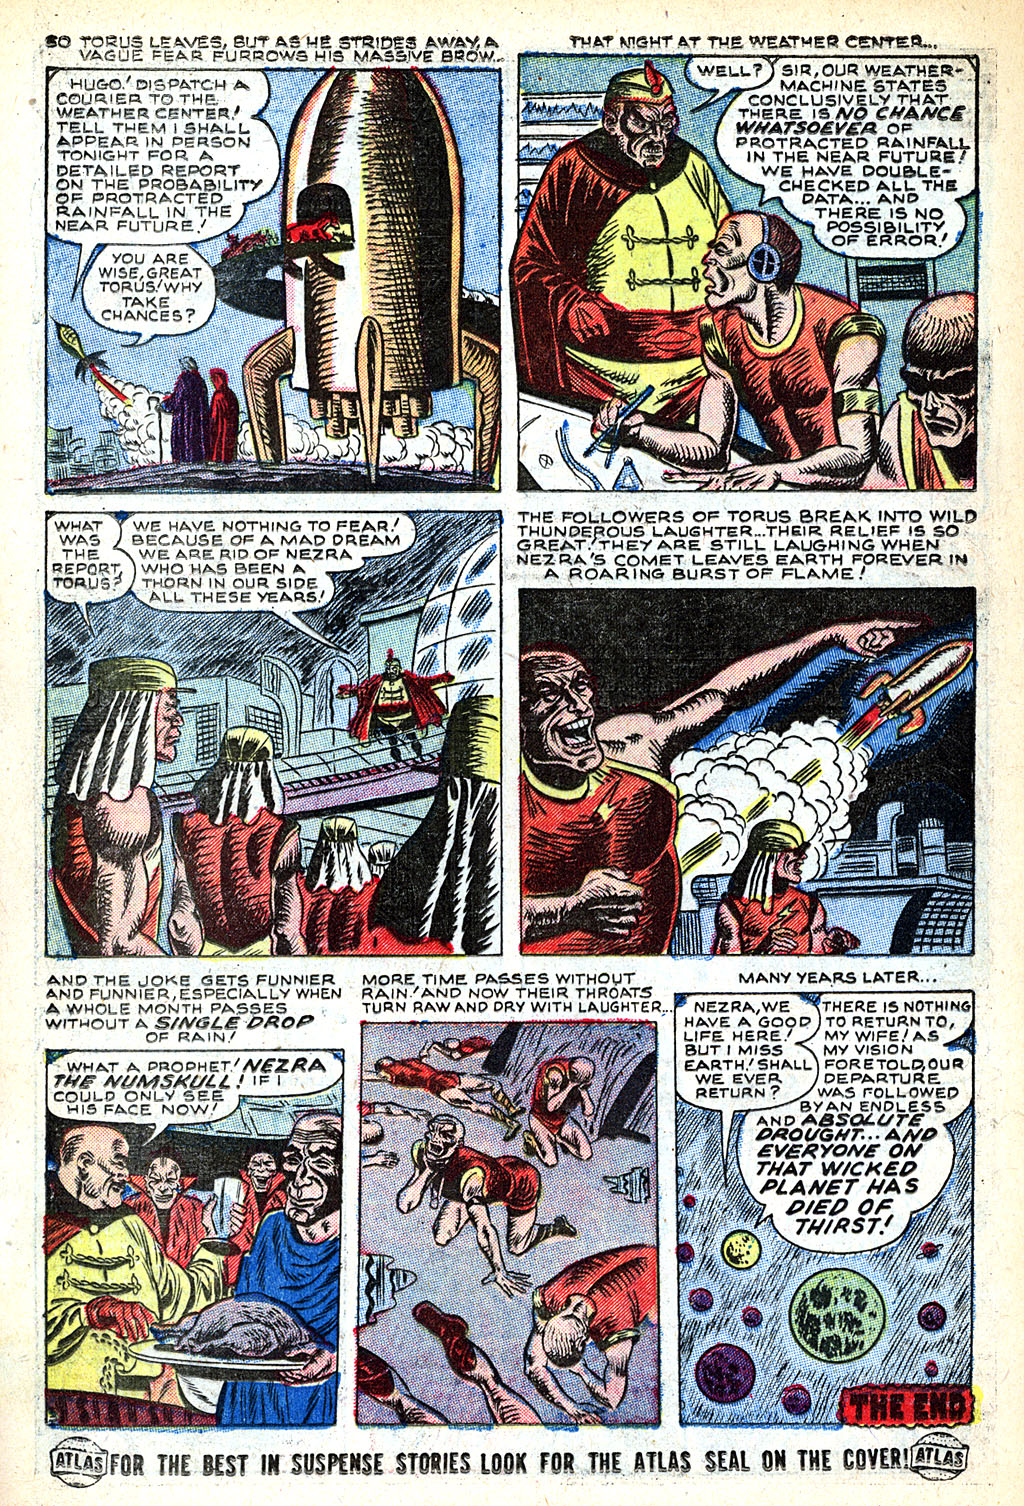 Marvel Tales (1949) 118 Page 21